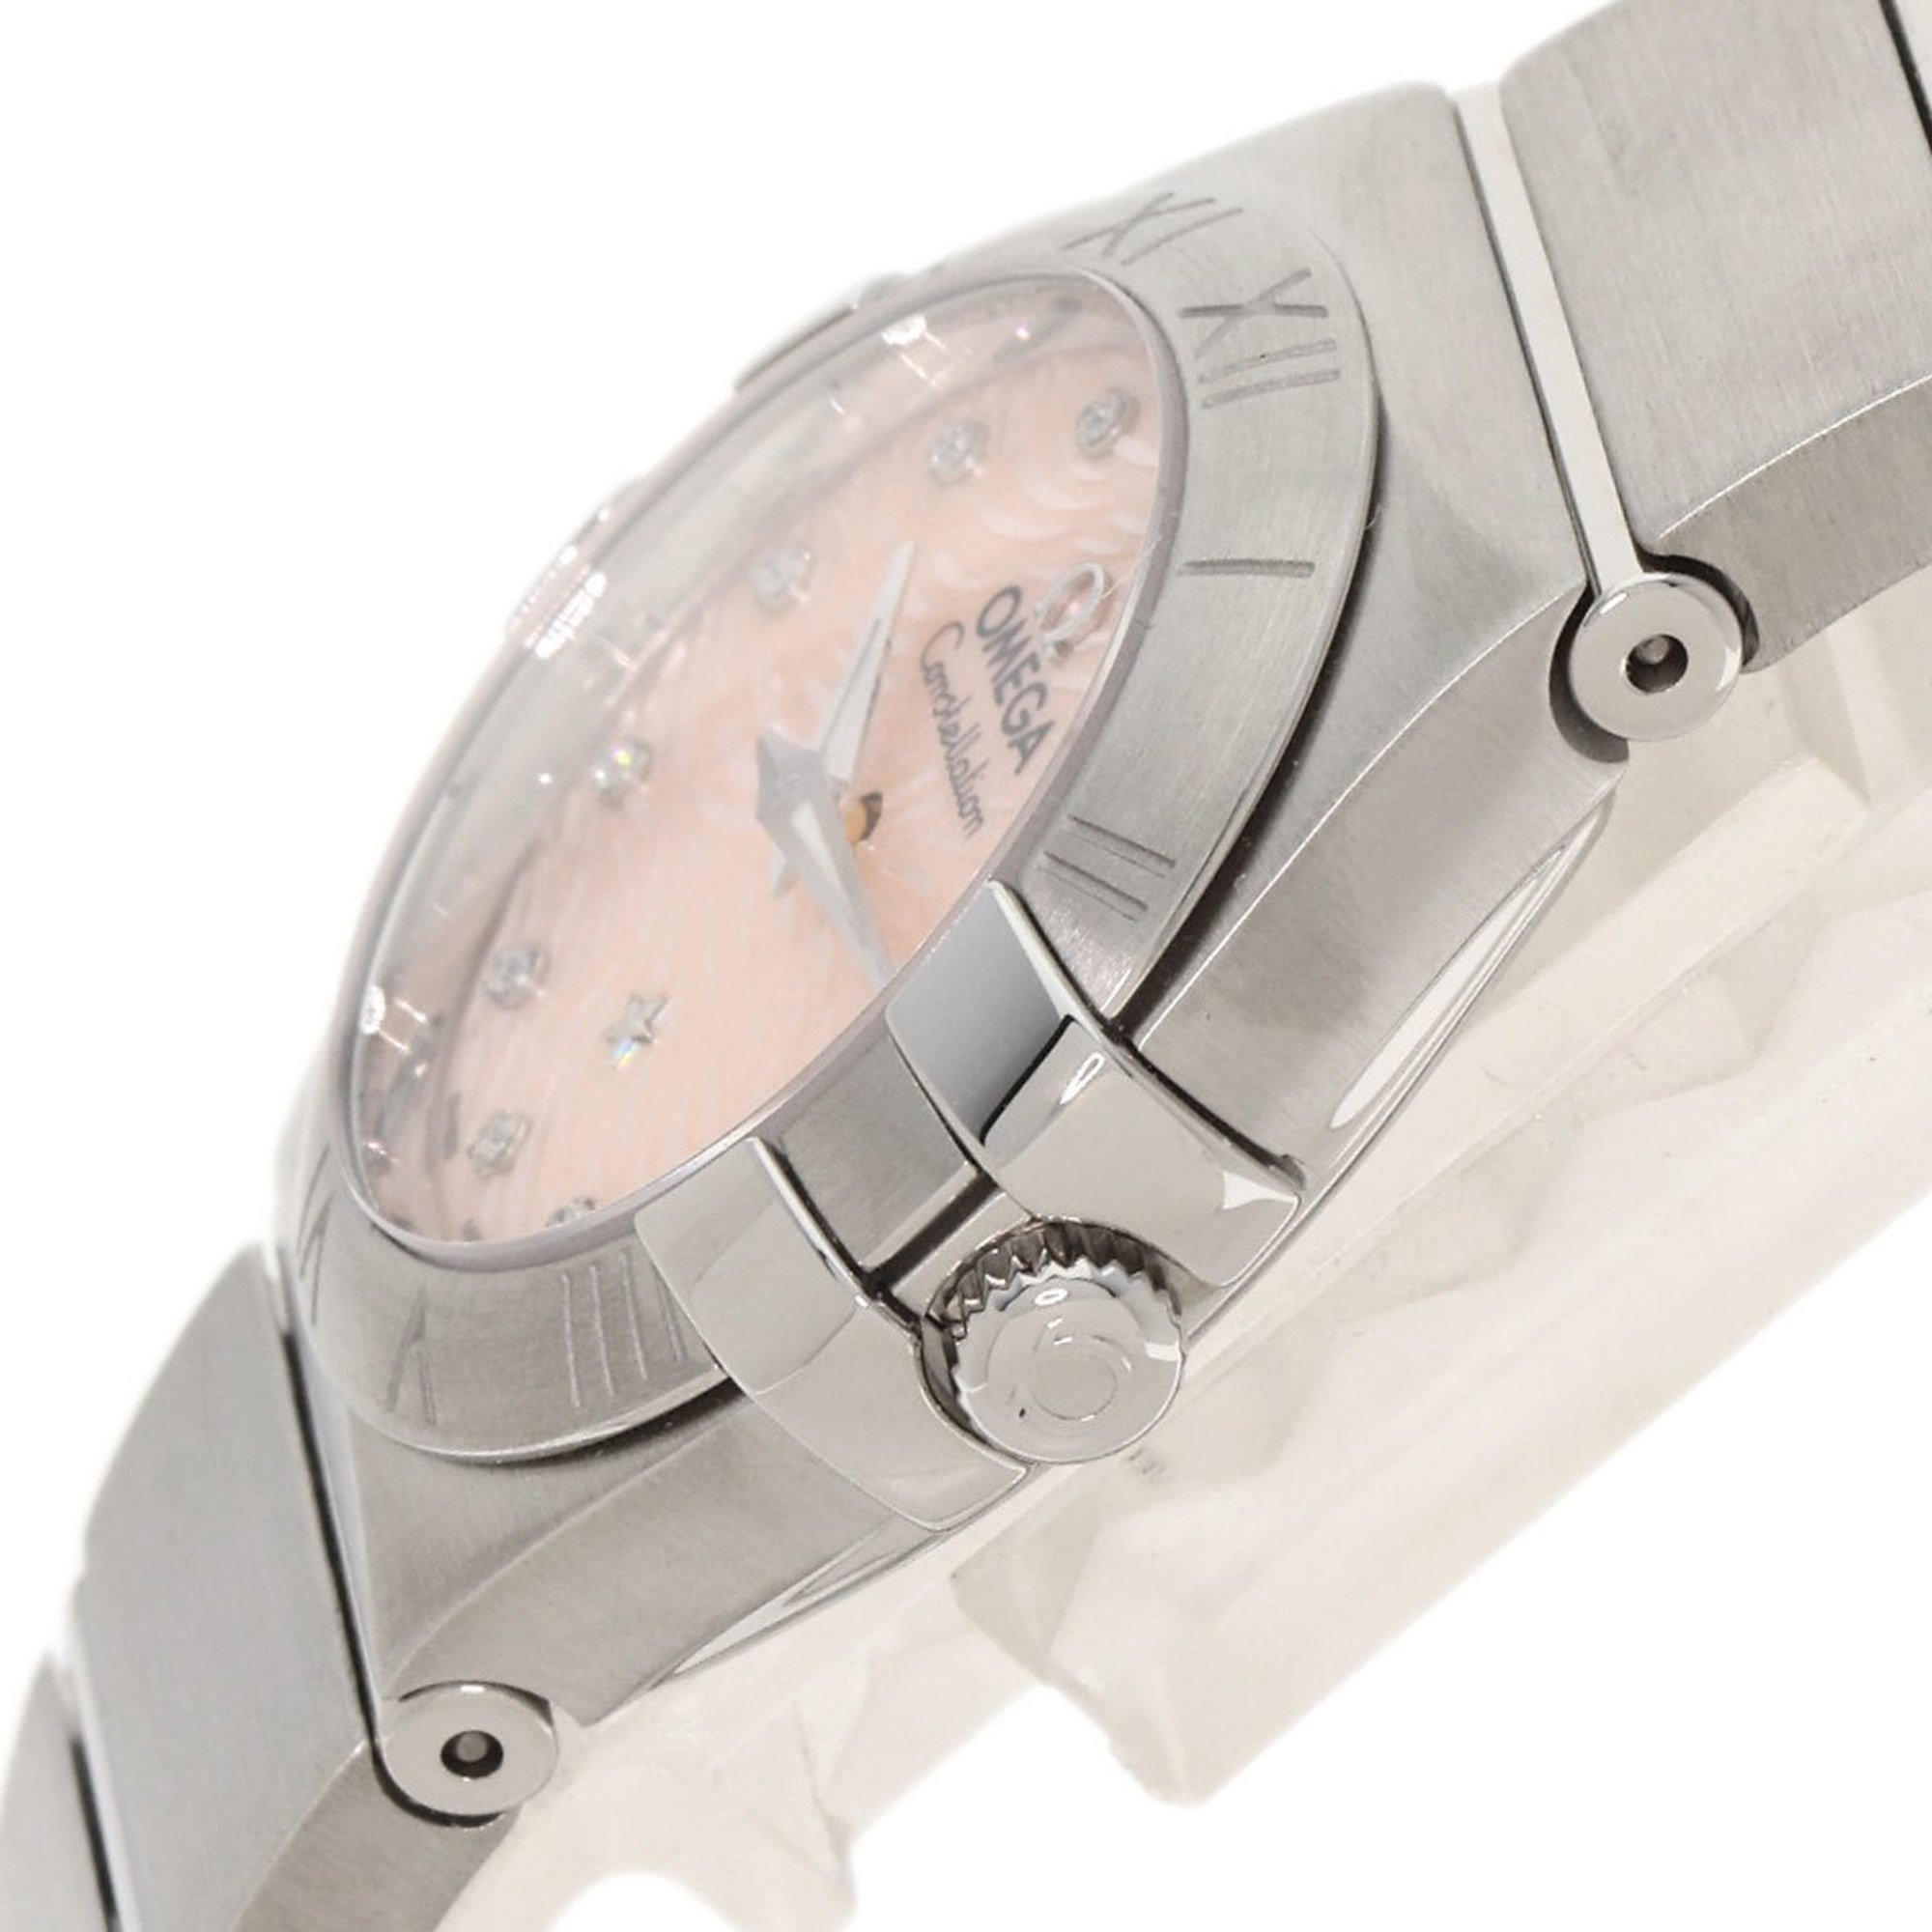 Omega Ref123.10.24.60.57.002 Constellation Plume Watch Stainless Steel/SS Ladies OMEGA